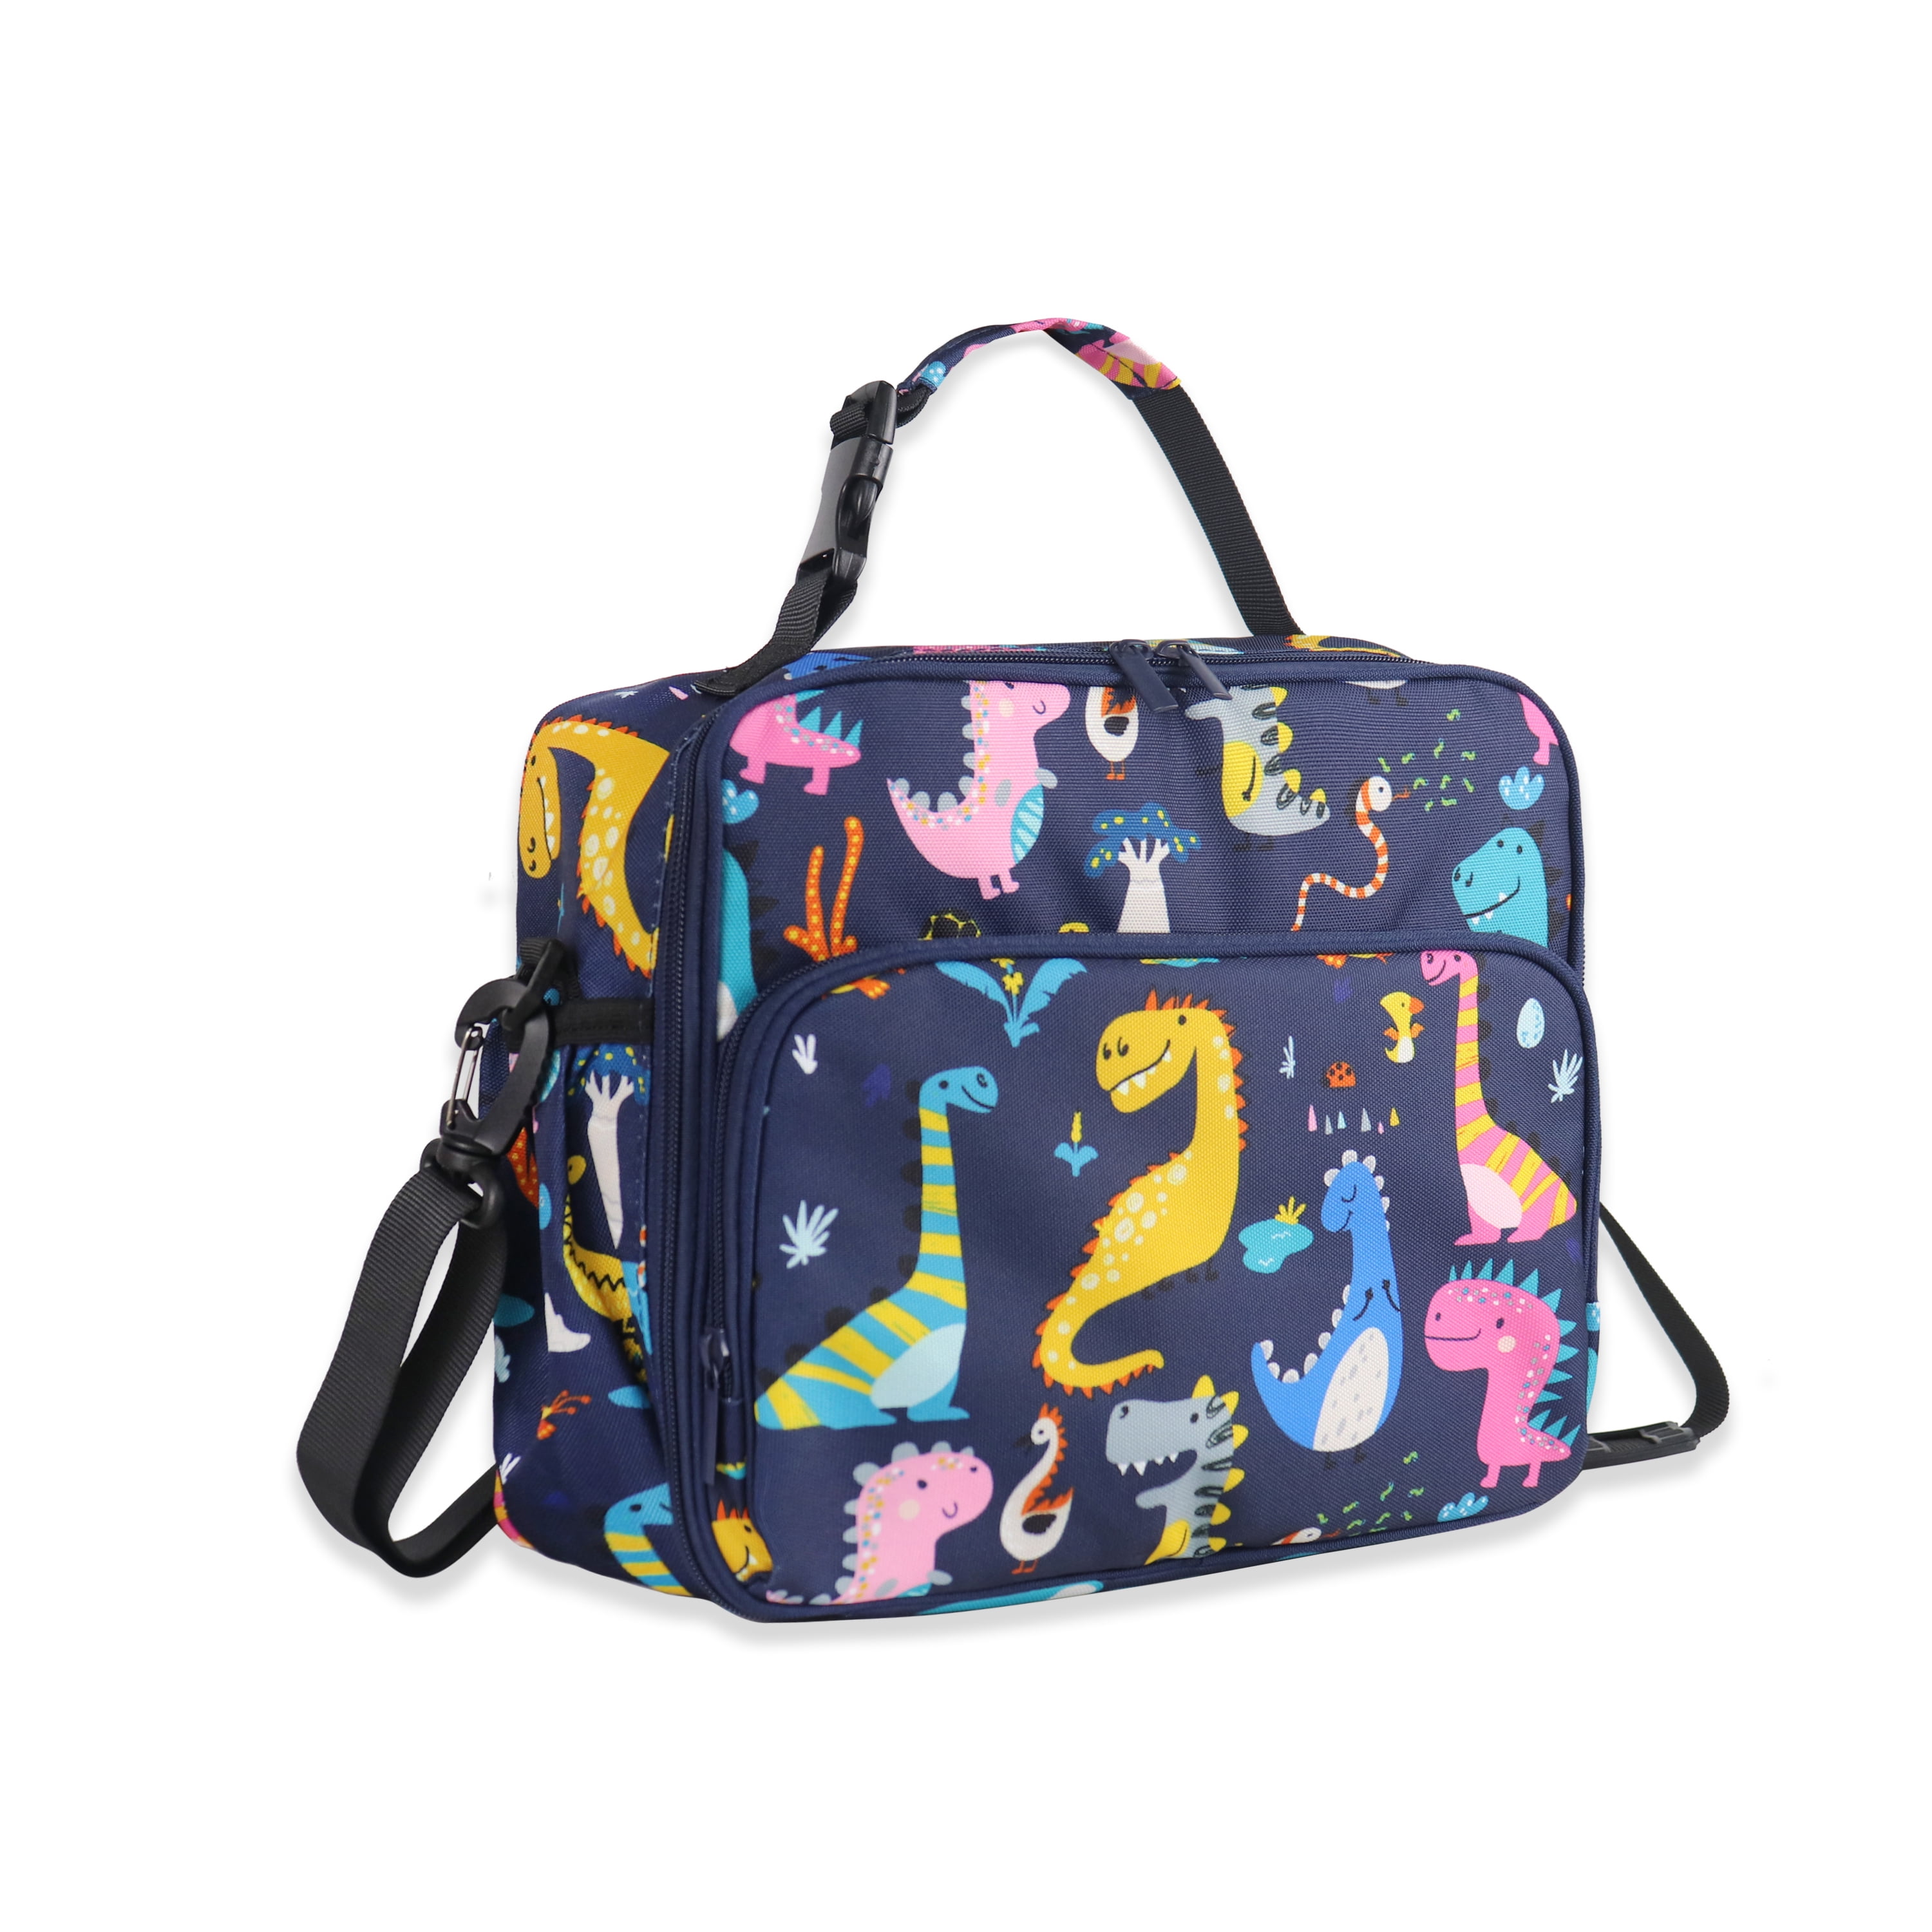 Merangue Kids Dinosaur Insulated Lunch Bag - Shop Lunch Boxes at H-E-B